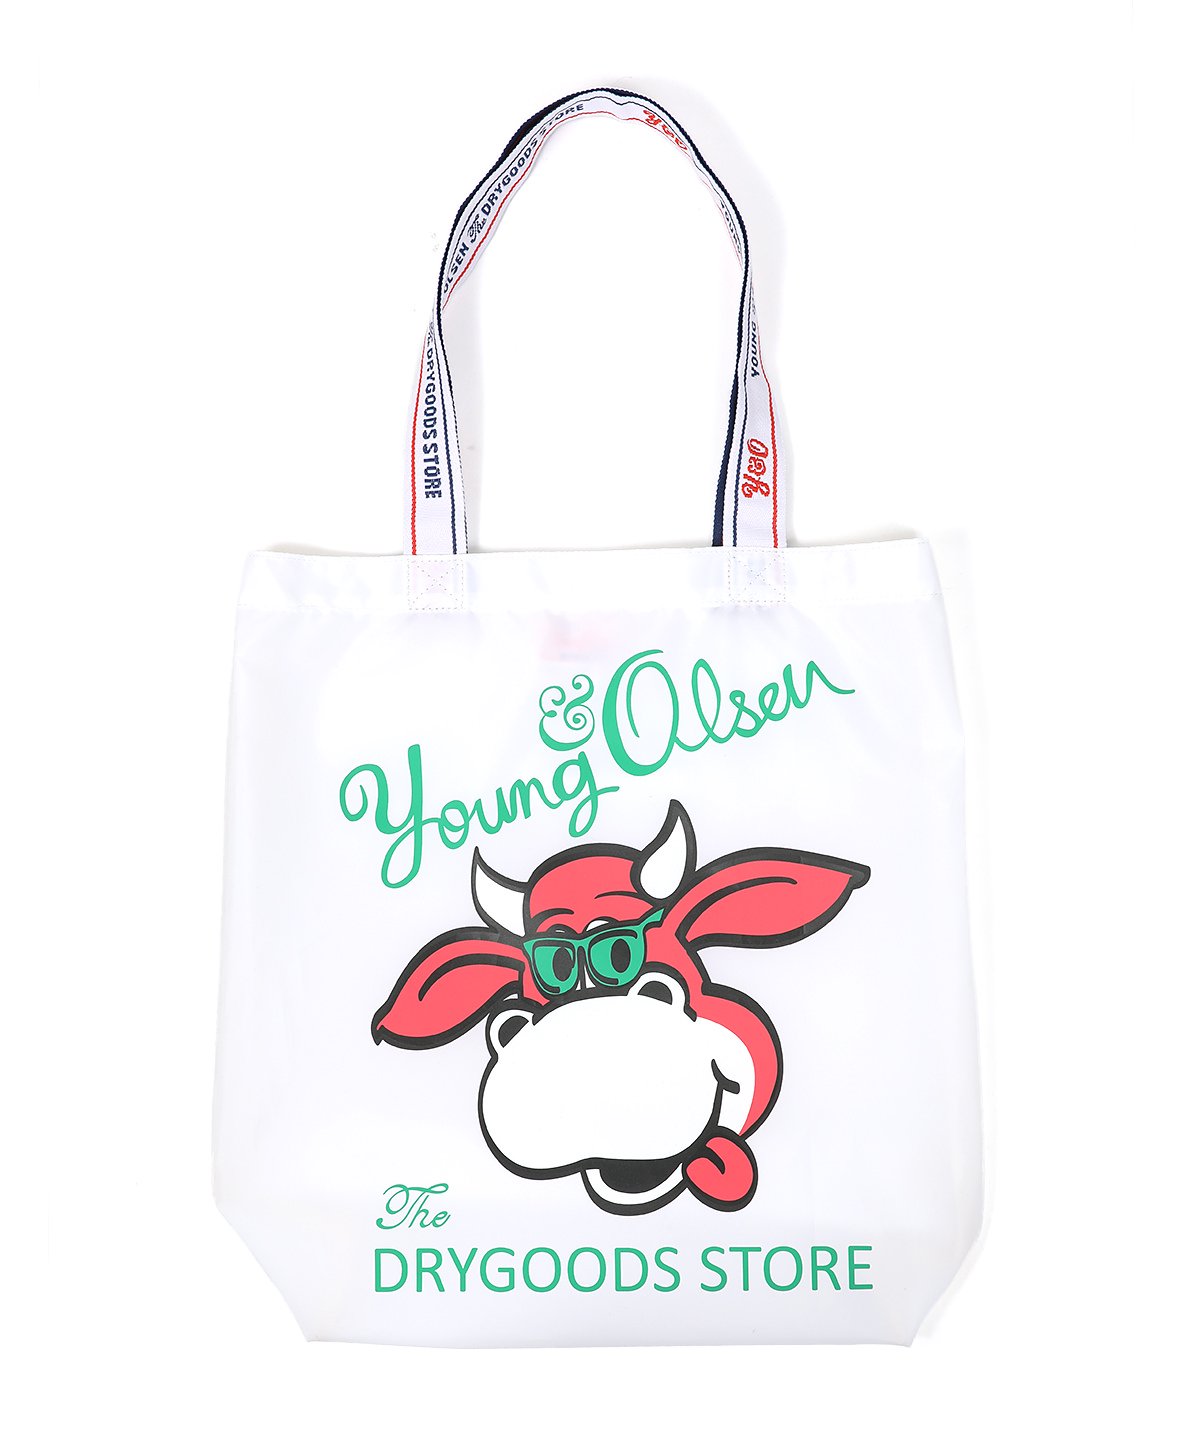 YOUNG &OLSEN THE DRYGOODS STORE アイコントート